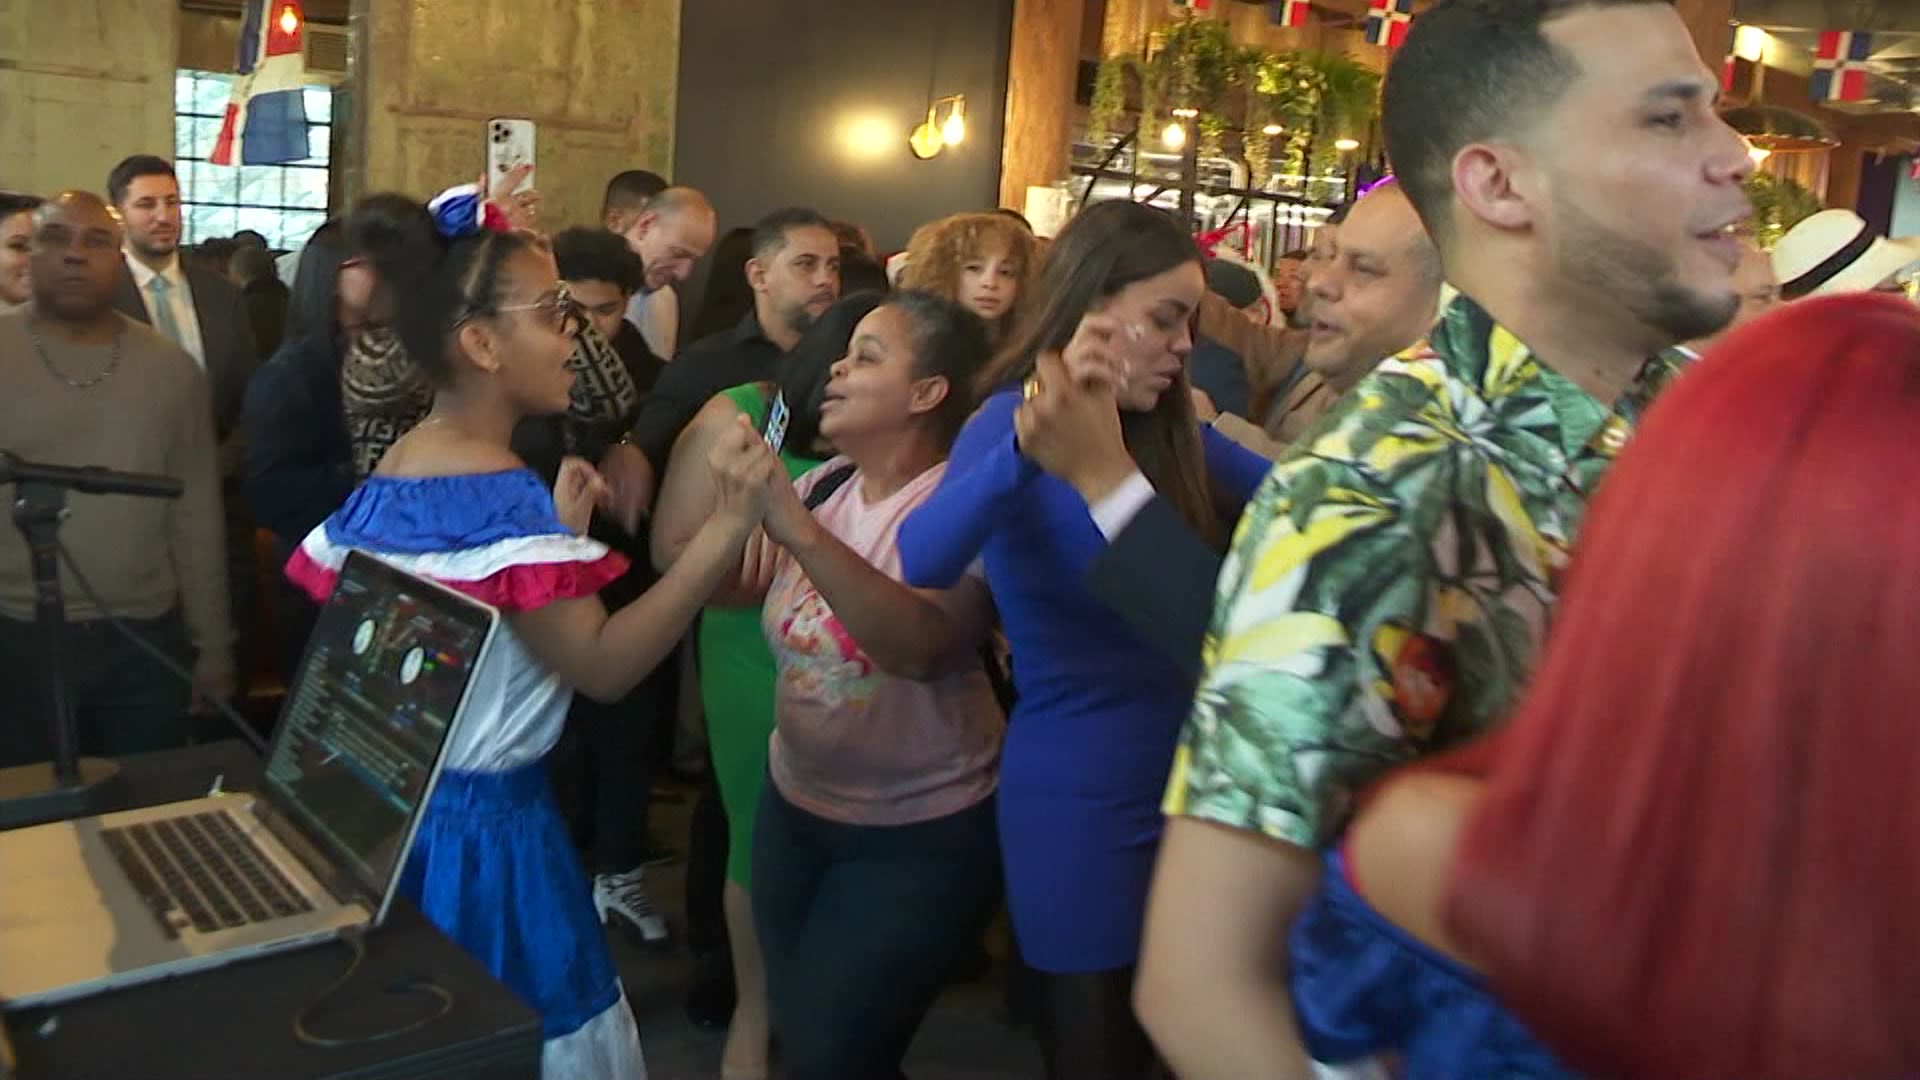 Yonkers community celebrates Dominican Independence Day